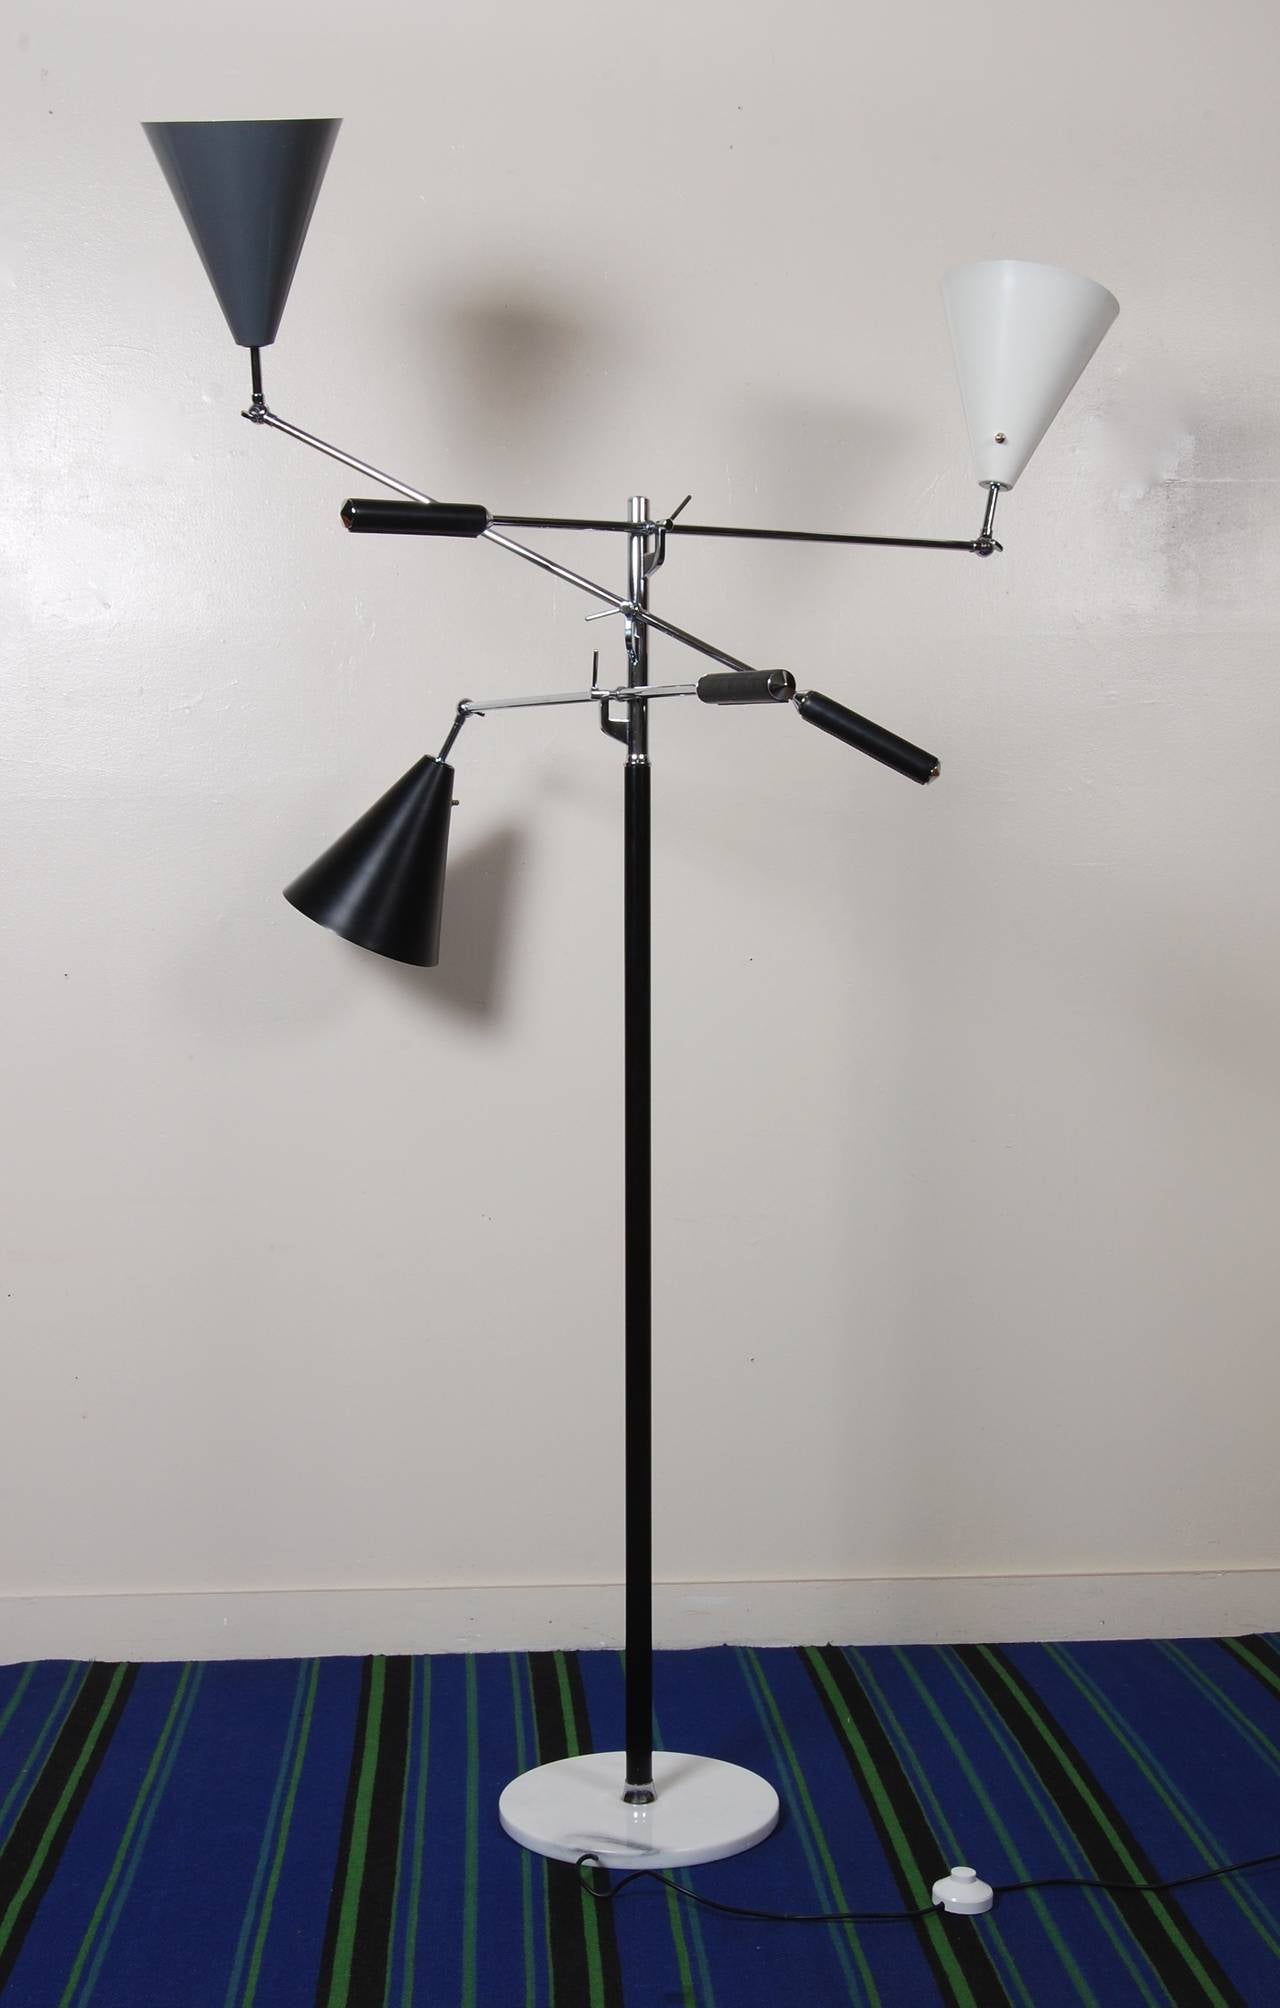 Early 1960s vintage Triennale floor lamp, this exceptional example has grey, black and white lacquered shades. The three adjustable arms have leather covered counter weights with chrome caps. Resting on a Carrara marble base, this lamp has been